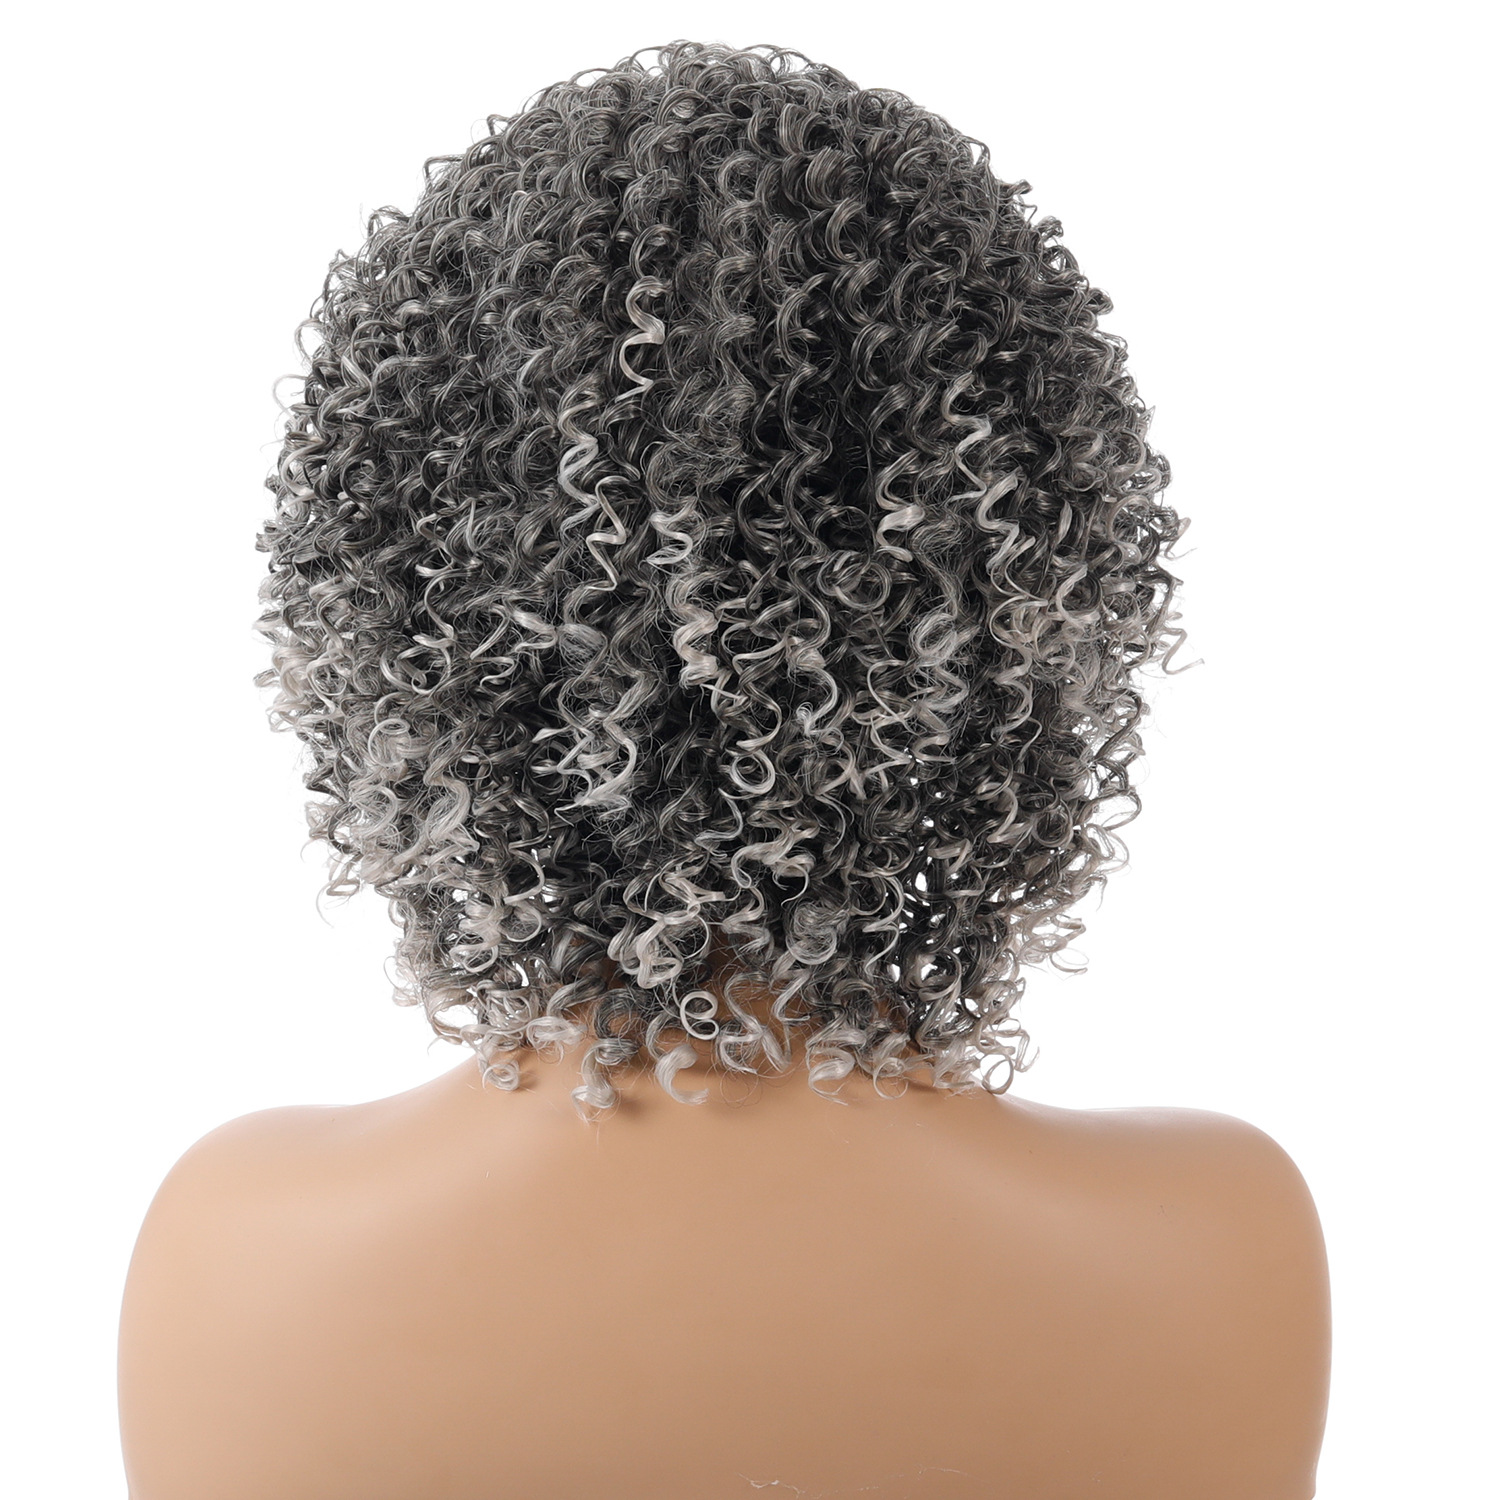 A wig with multicolor small curly hair, made of synthetic material.